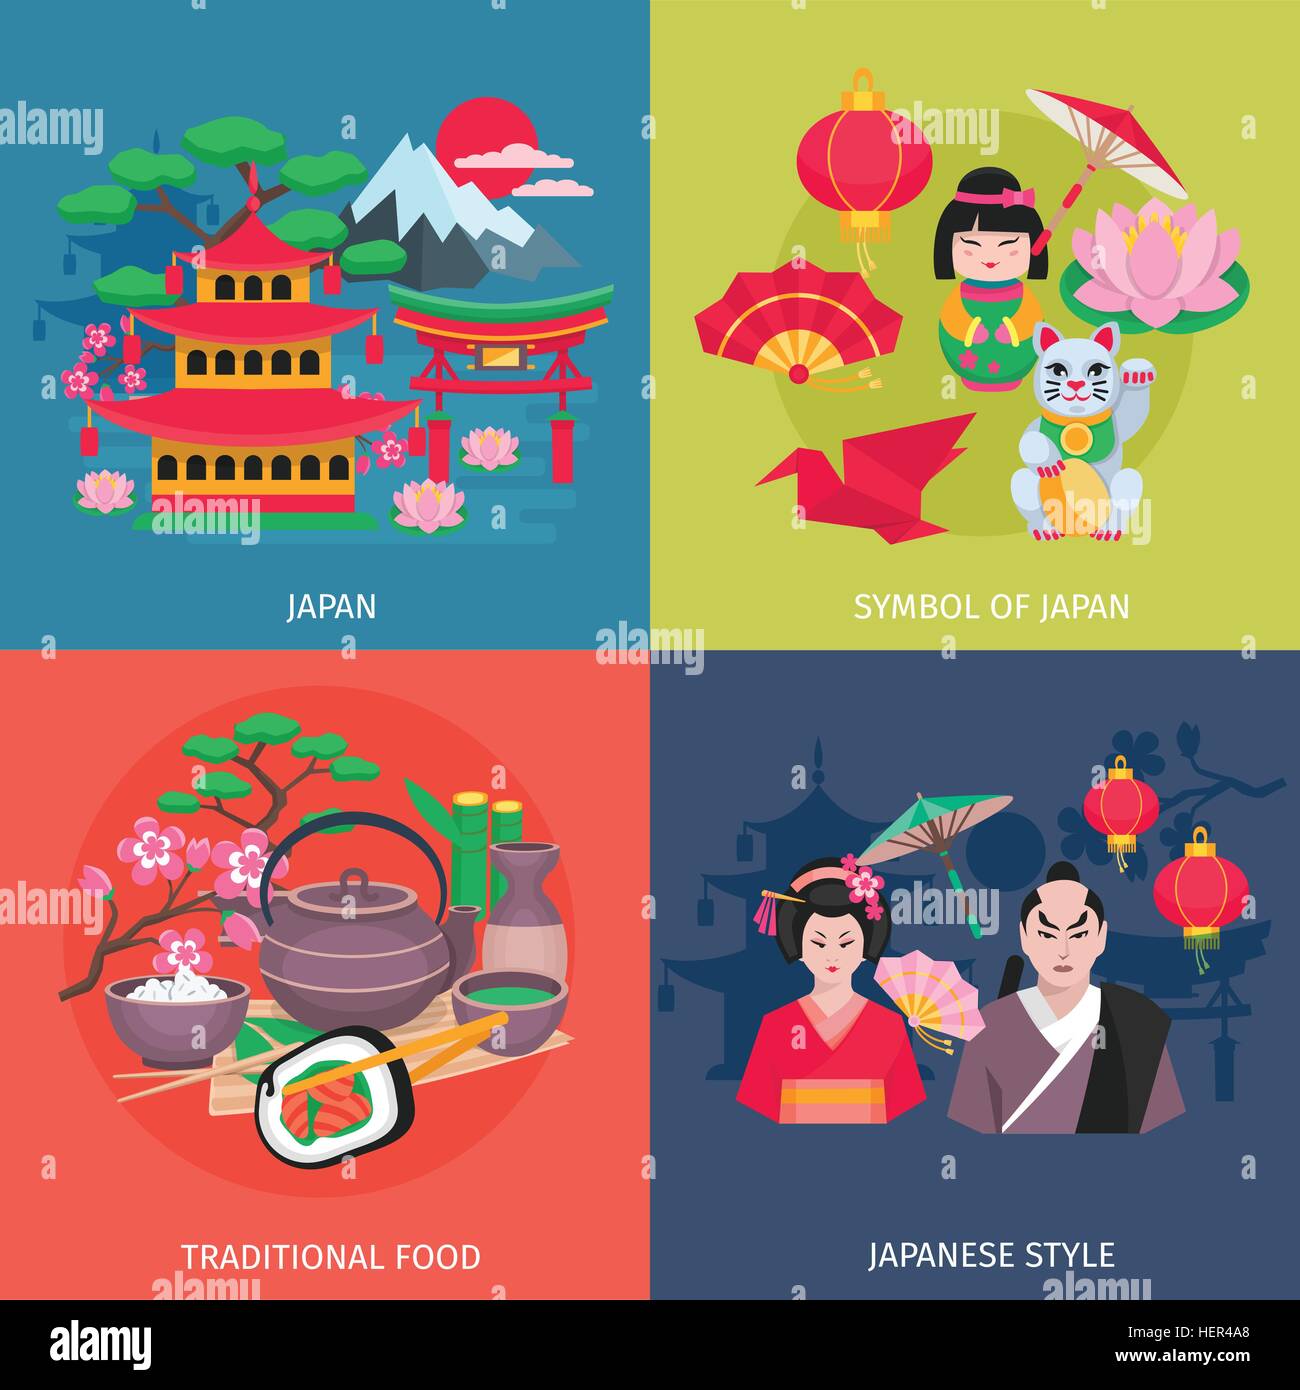 Japanese Symbols 4 Flat Icons Square. Japanese style kimono and traditional food symbols 4 flat icons square colorful banner Stock Vector